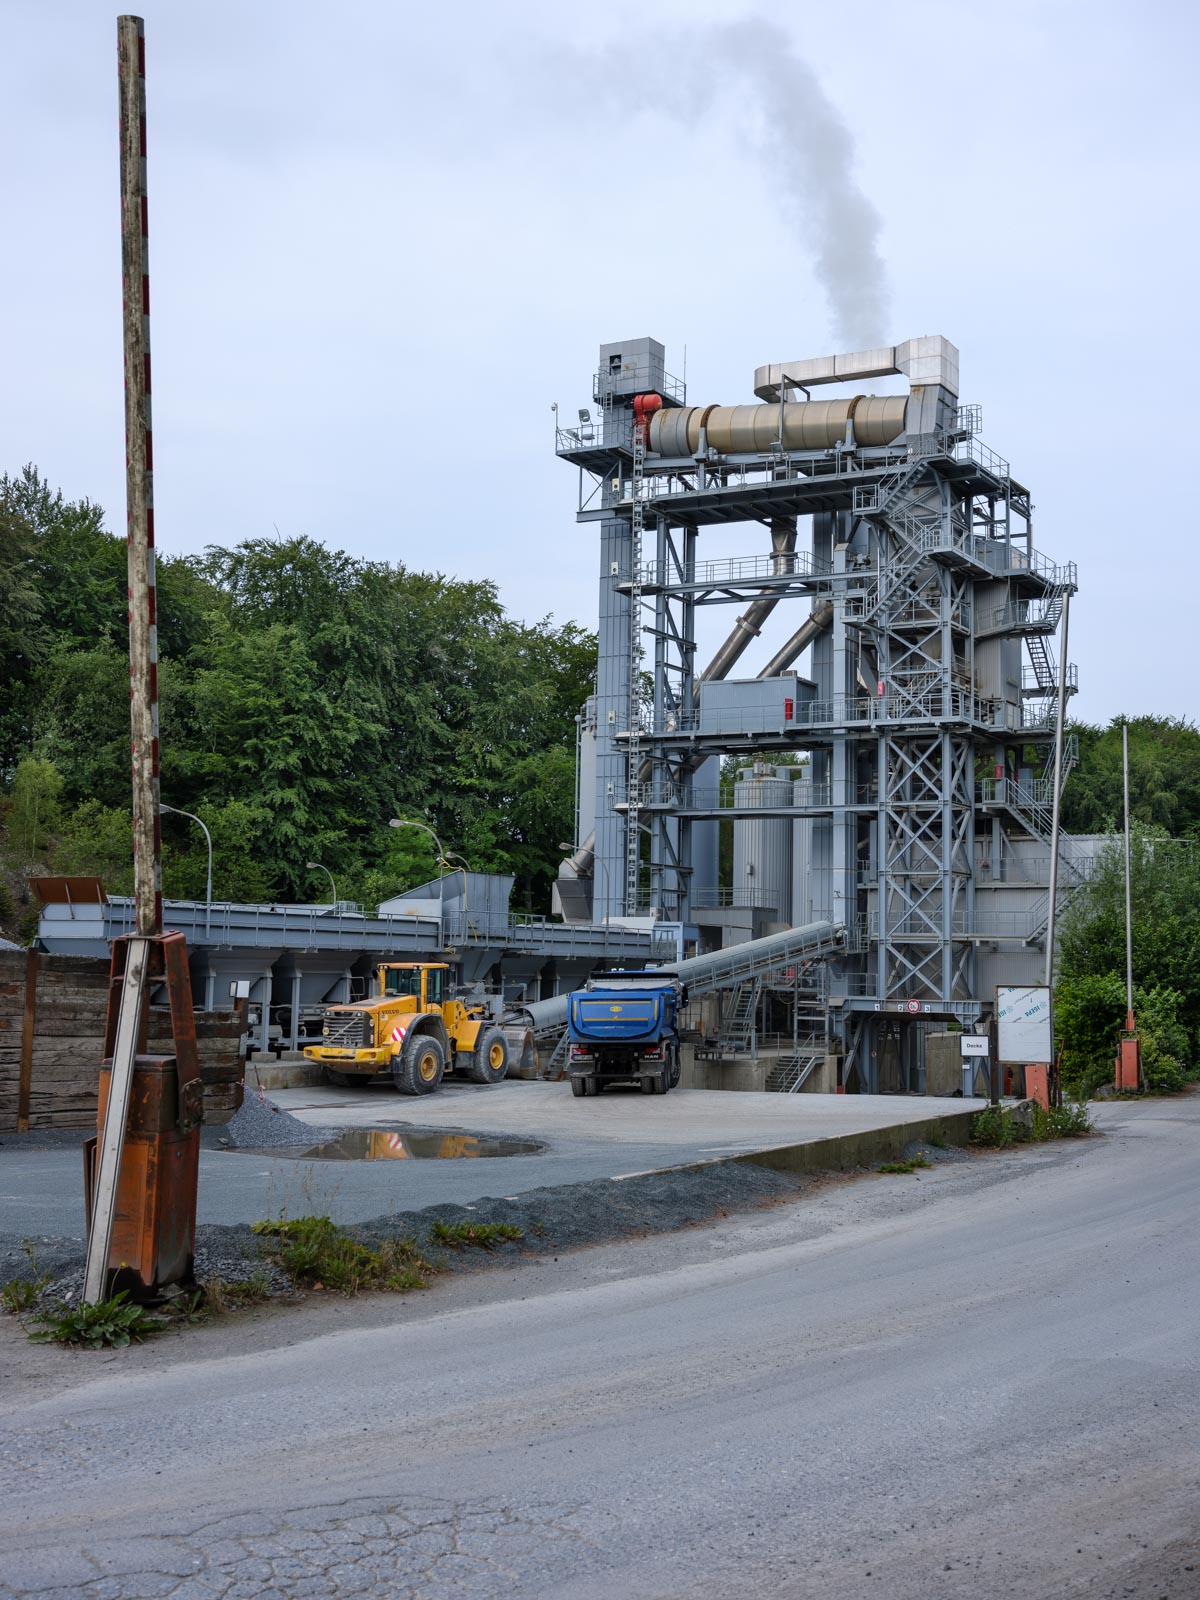 Hesseln asphalt mixing plant in the Teutoburg Forest (Hesseln, Germany).